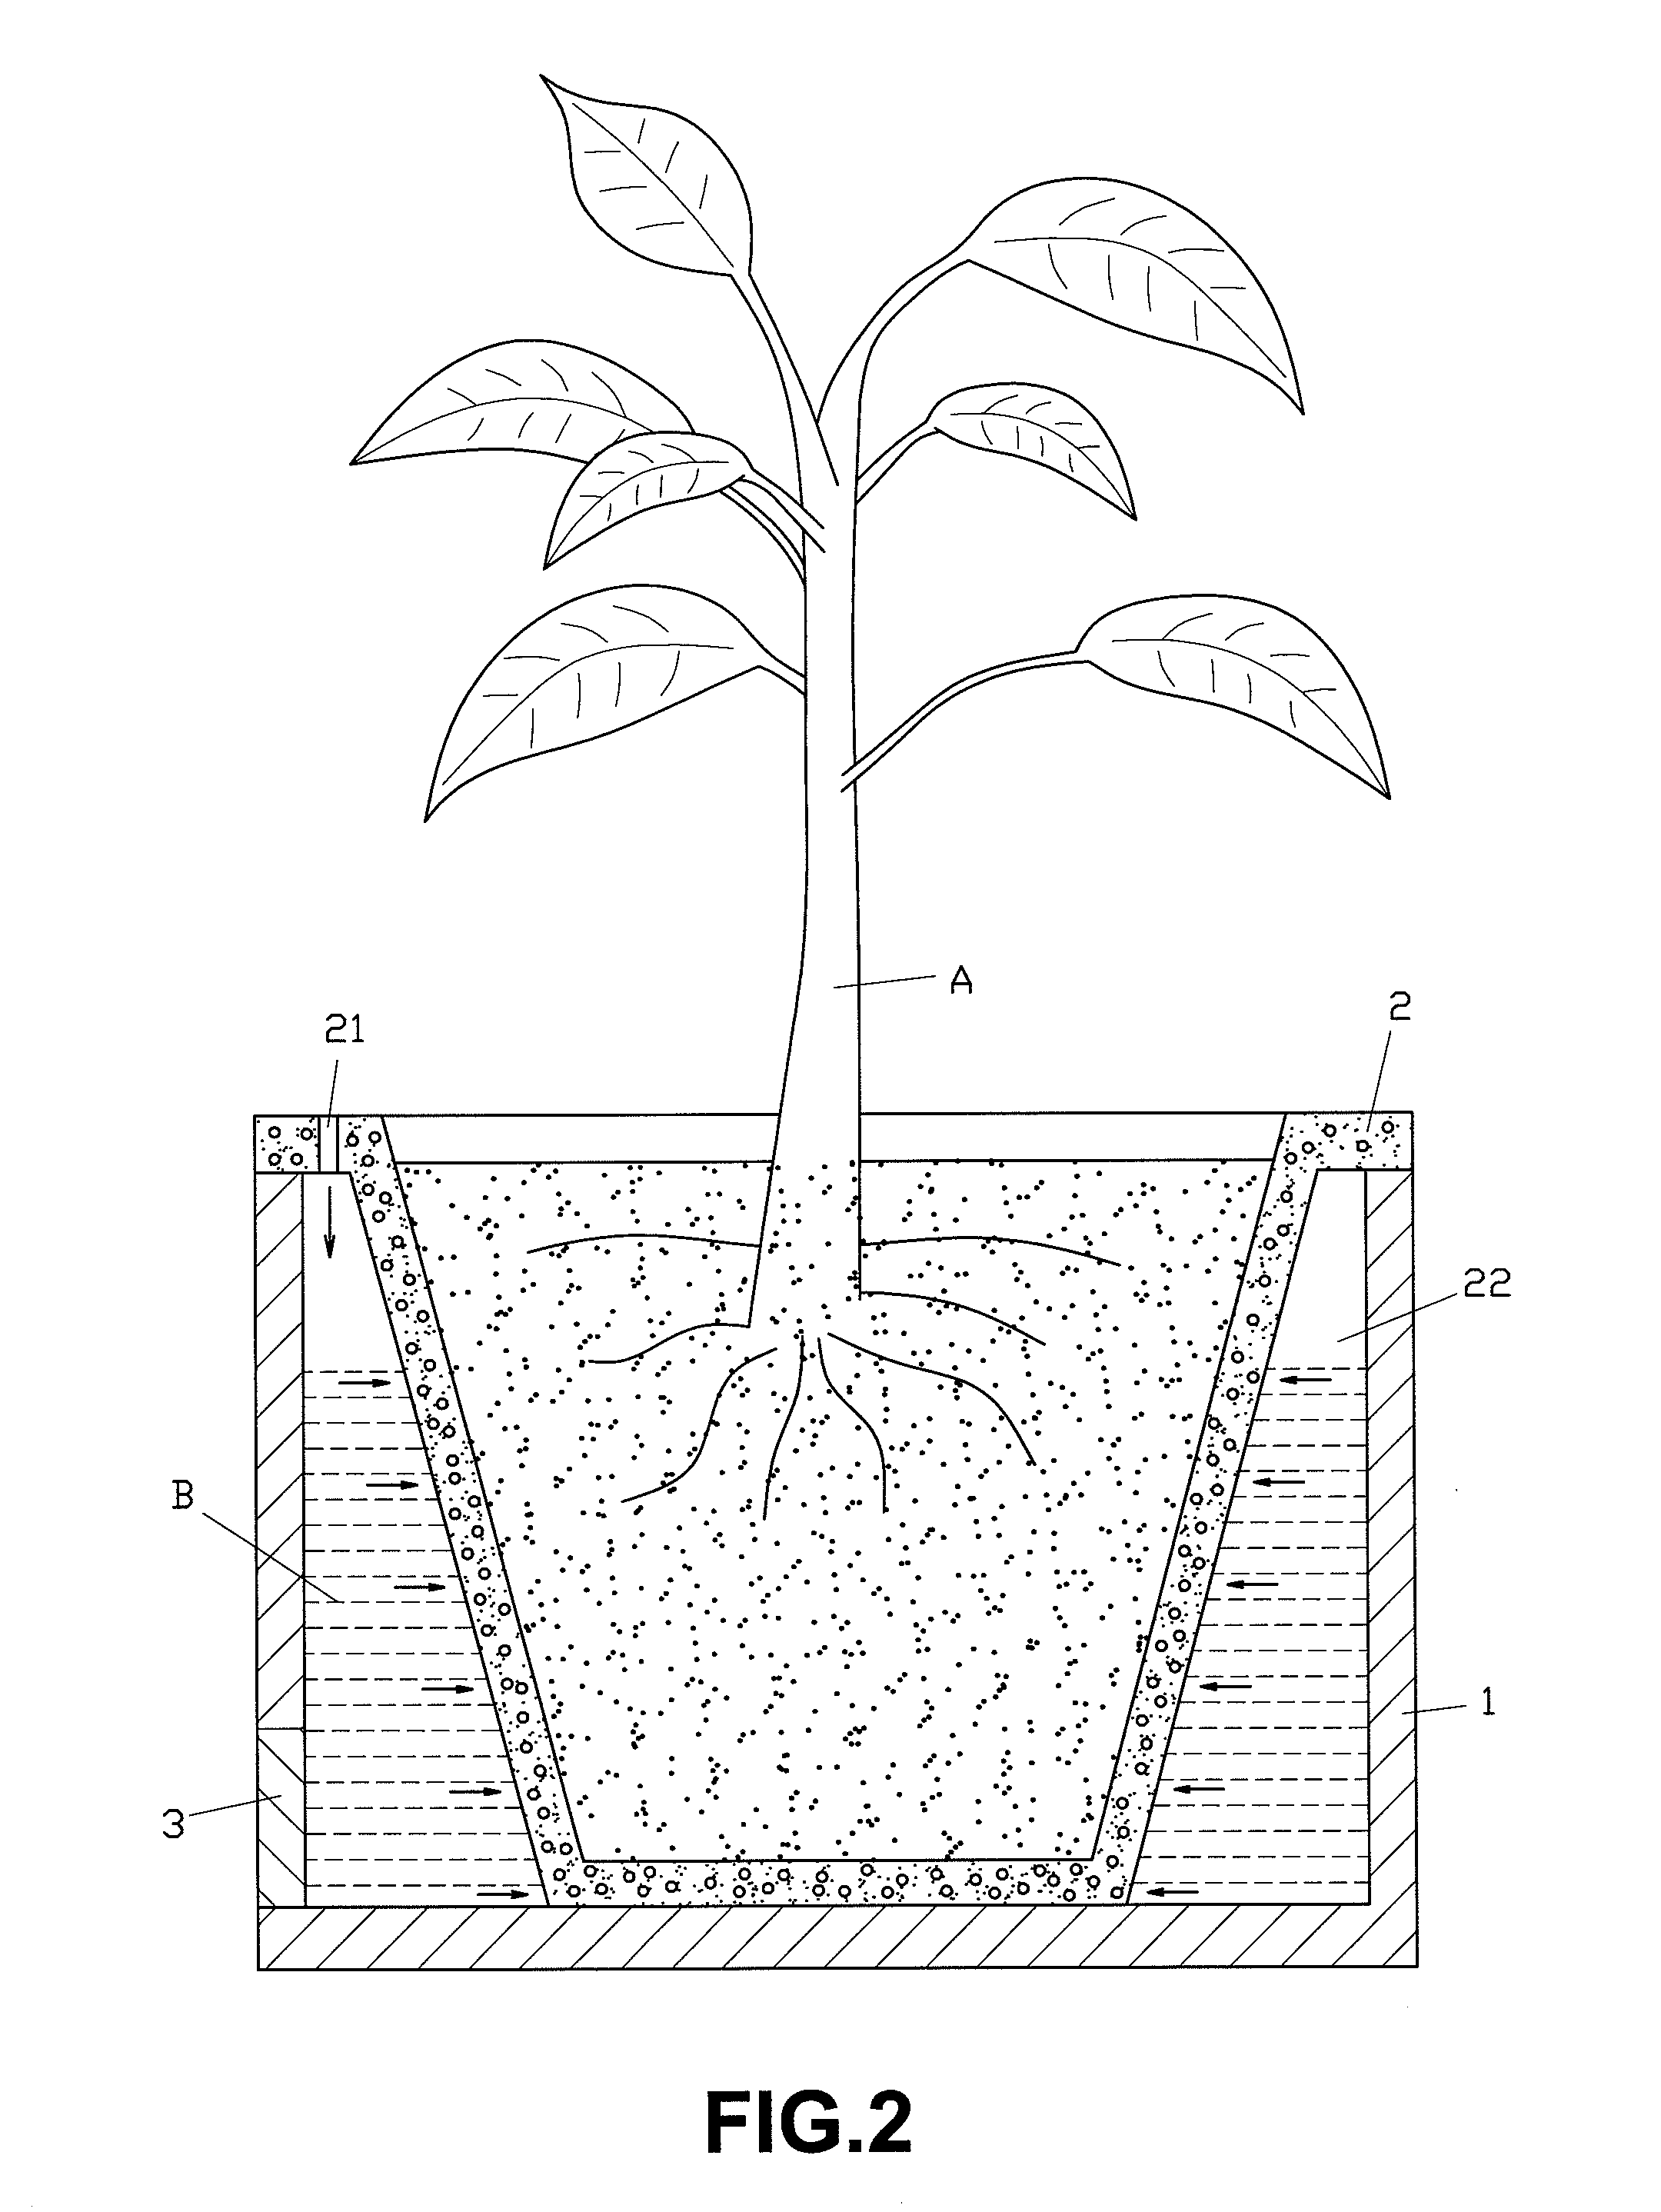 Flower pot using humidity sensor material to prompt watering